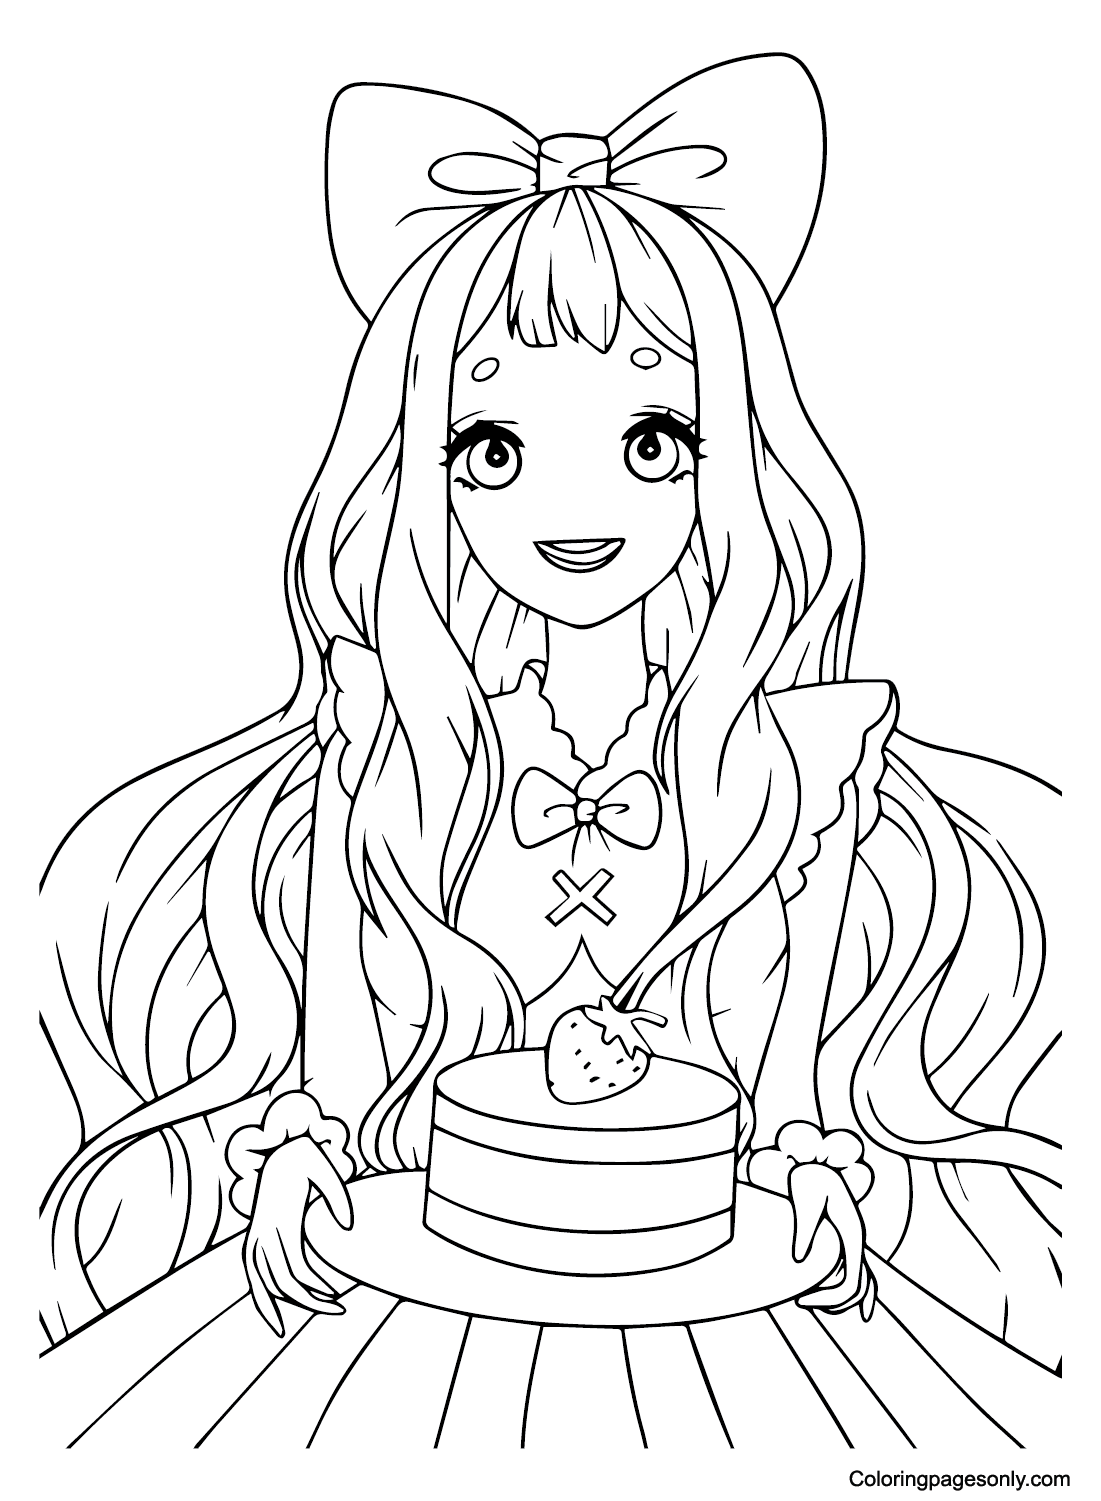 Teenage Girl with Cake Coloring Pages